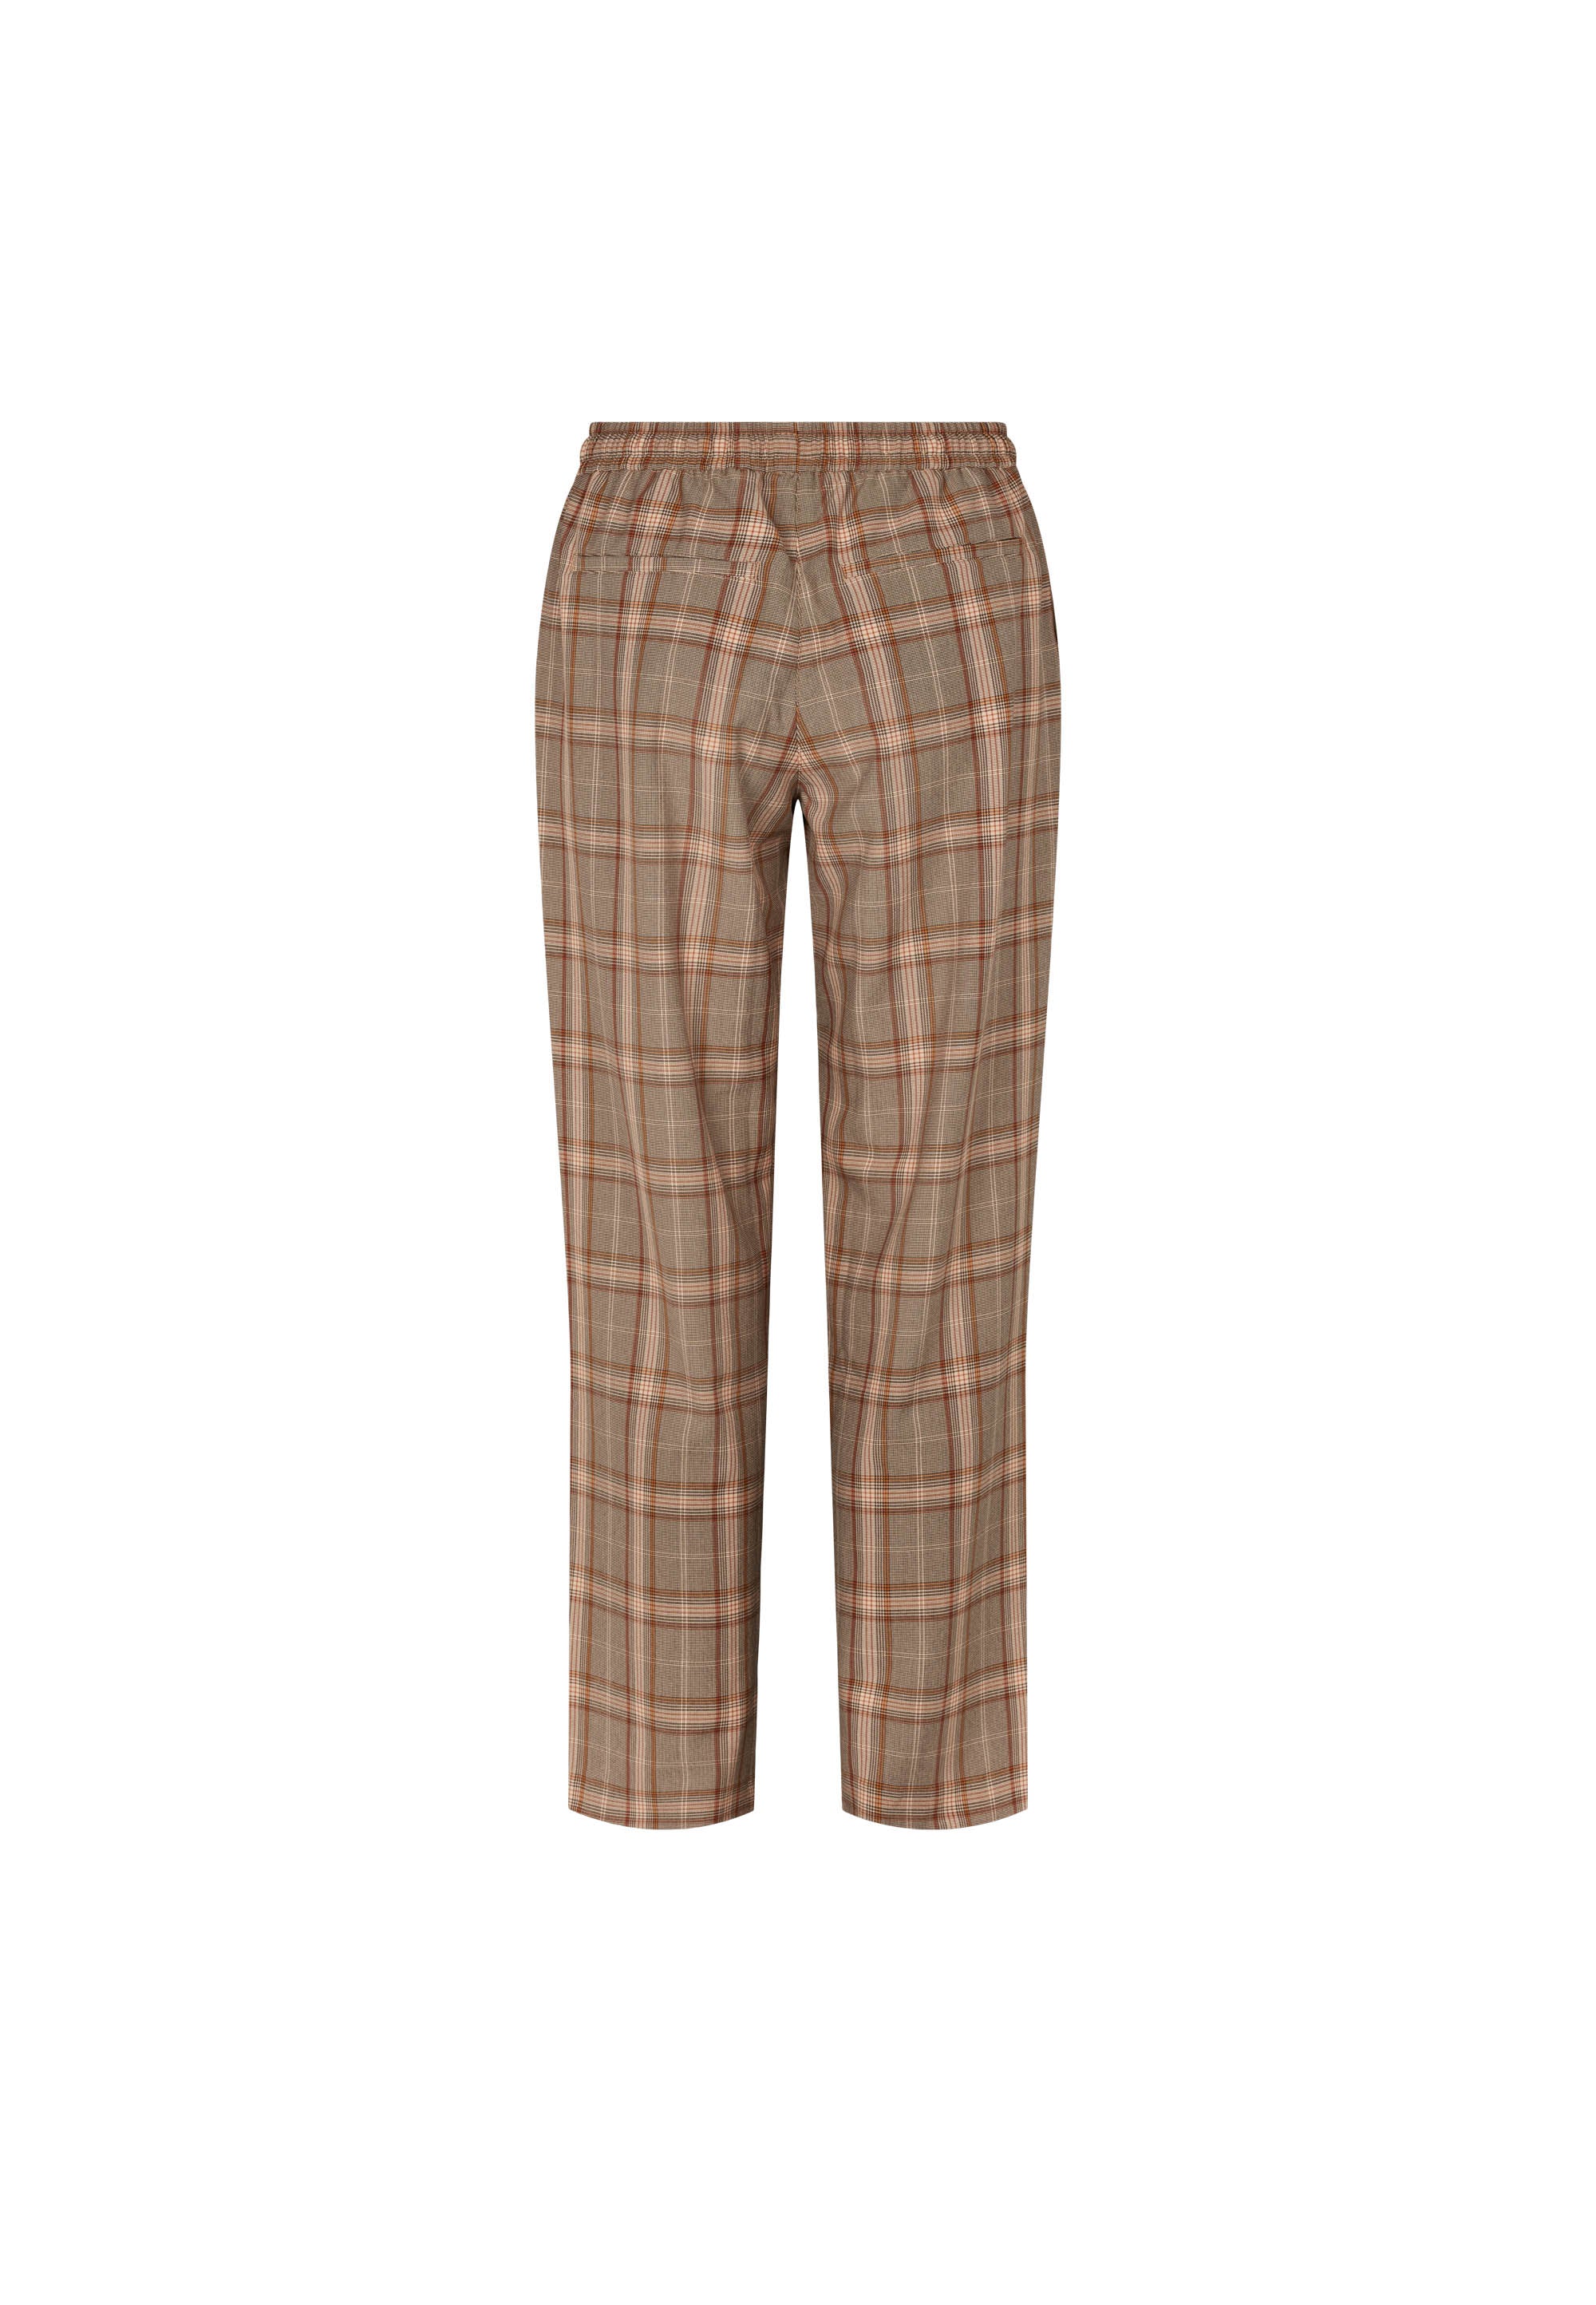 LAURIE  Oline Relaxed - Medium Length Trousers RELAXED 84285 Deer Check